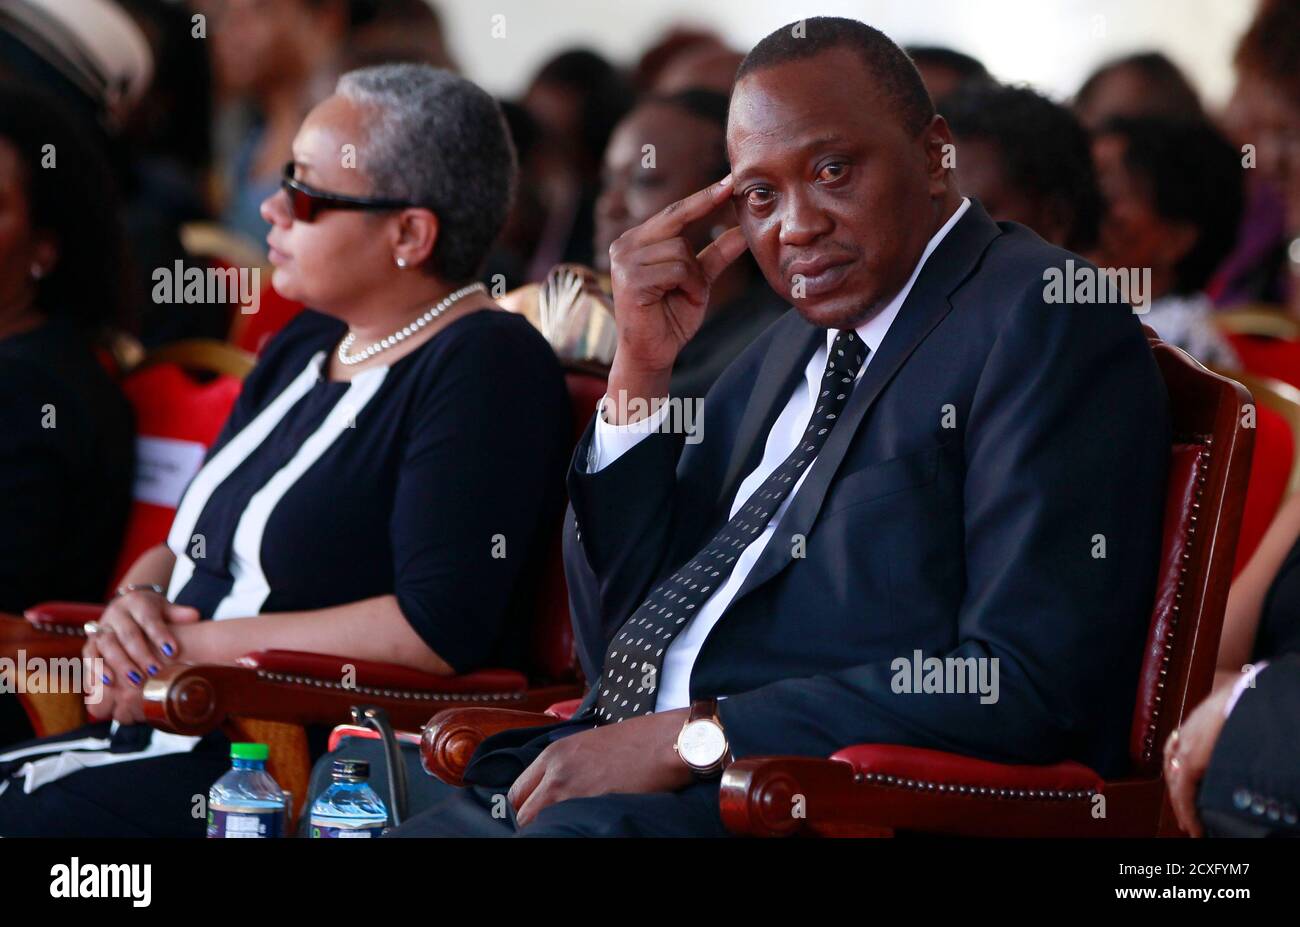 Kenyan President Uhuru Kenyatta attends the burial of his nephew Mbugua Maina and Maina's fiancee Rosemary Wahito, who were both killed during the Westgate Mall shopping mall attack, in Gatundu village near Nairobi, September 27, 2013. At least 72 people were killed in the attack which occurred over the weekend. REUTERS/Thomas Mukoya (KENYA - Tags: CIVIL UNREST CRIME LAW OBITUARY) Stock Photo